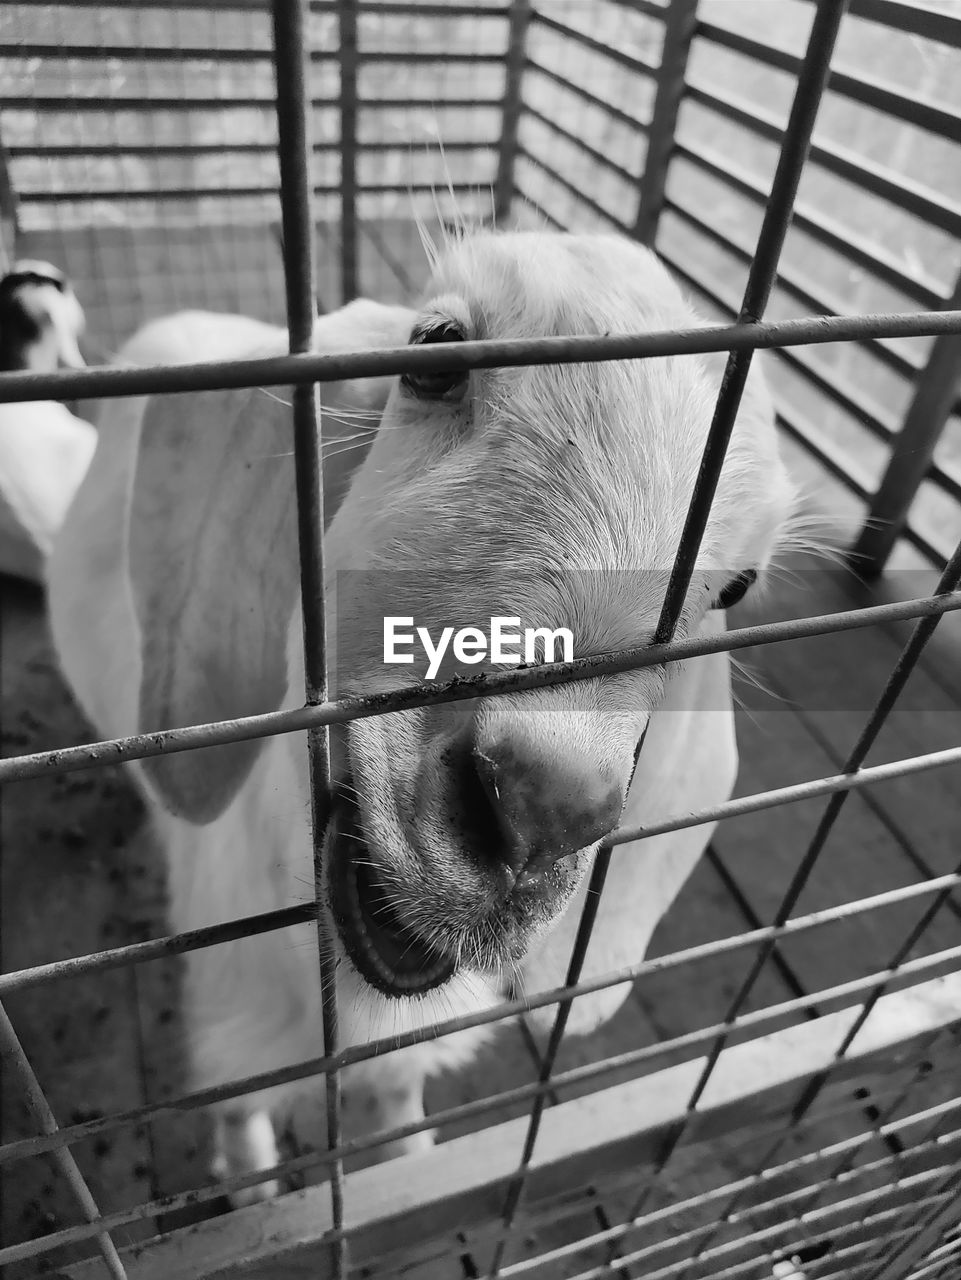 animal themes, animal, one animal, white, mammal, cage, black, black and white, monochrome, monochrome photography, metal, animals in captivity, pet, domestic animals, no people, animal shelter, animal wildlife, trapped, animal body part, day, close-up, focus on foreground, outdoors